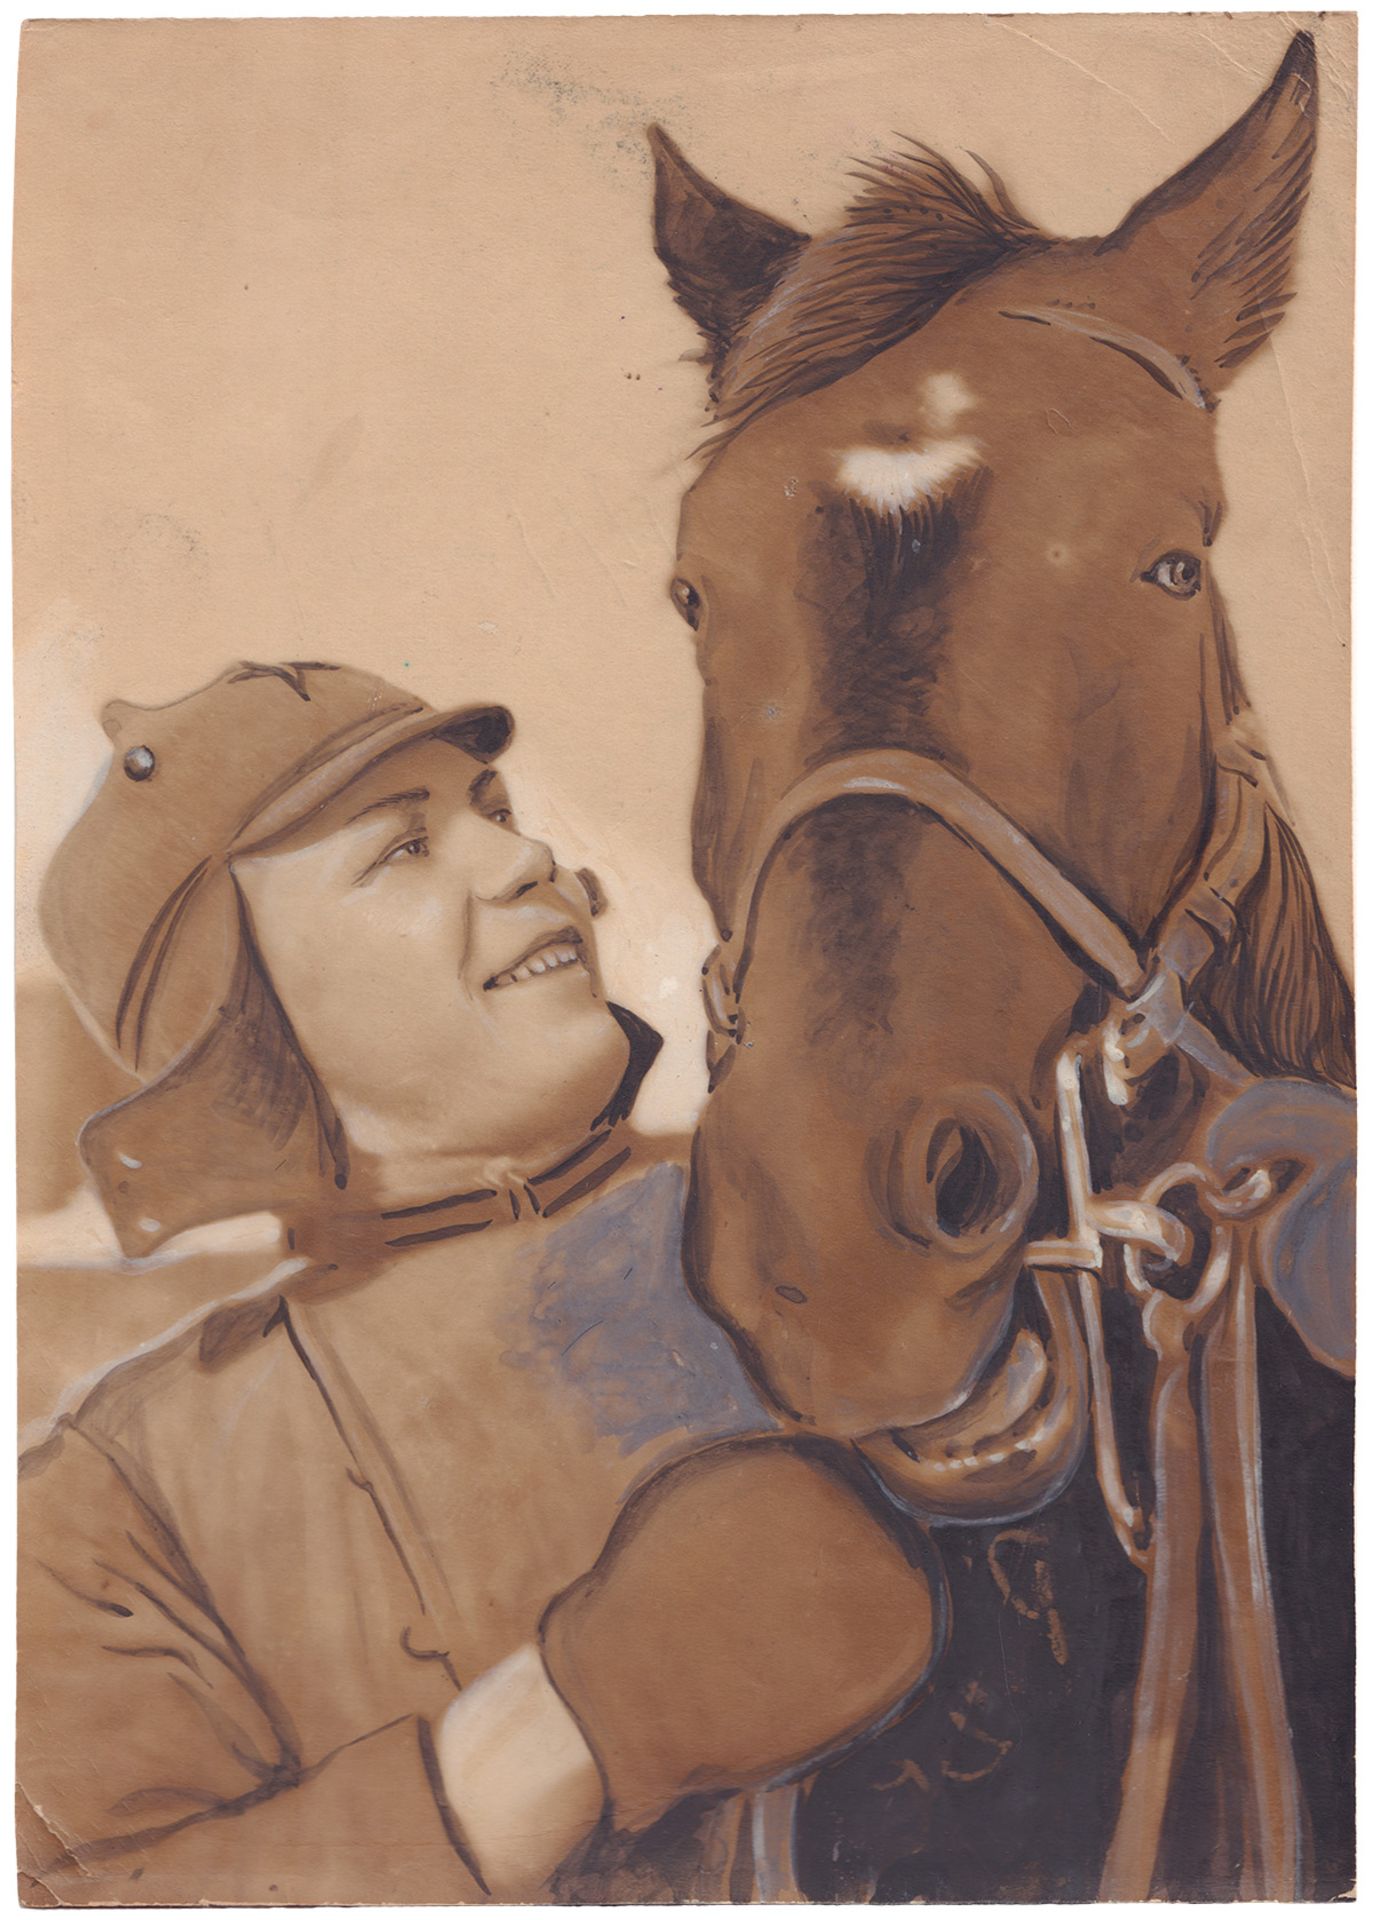 [Soviet. Retouche for official publishing]. Photype (?). “Red Army soldier with the horse”. - 1940s.